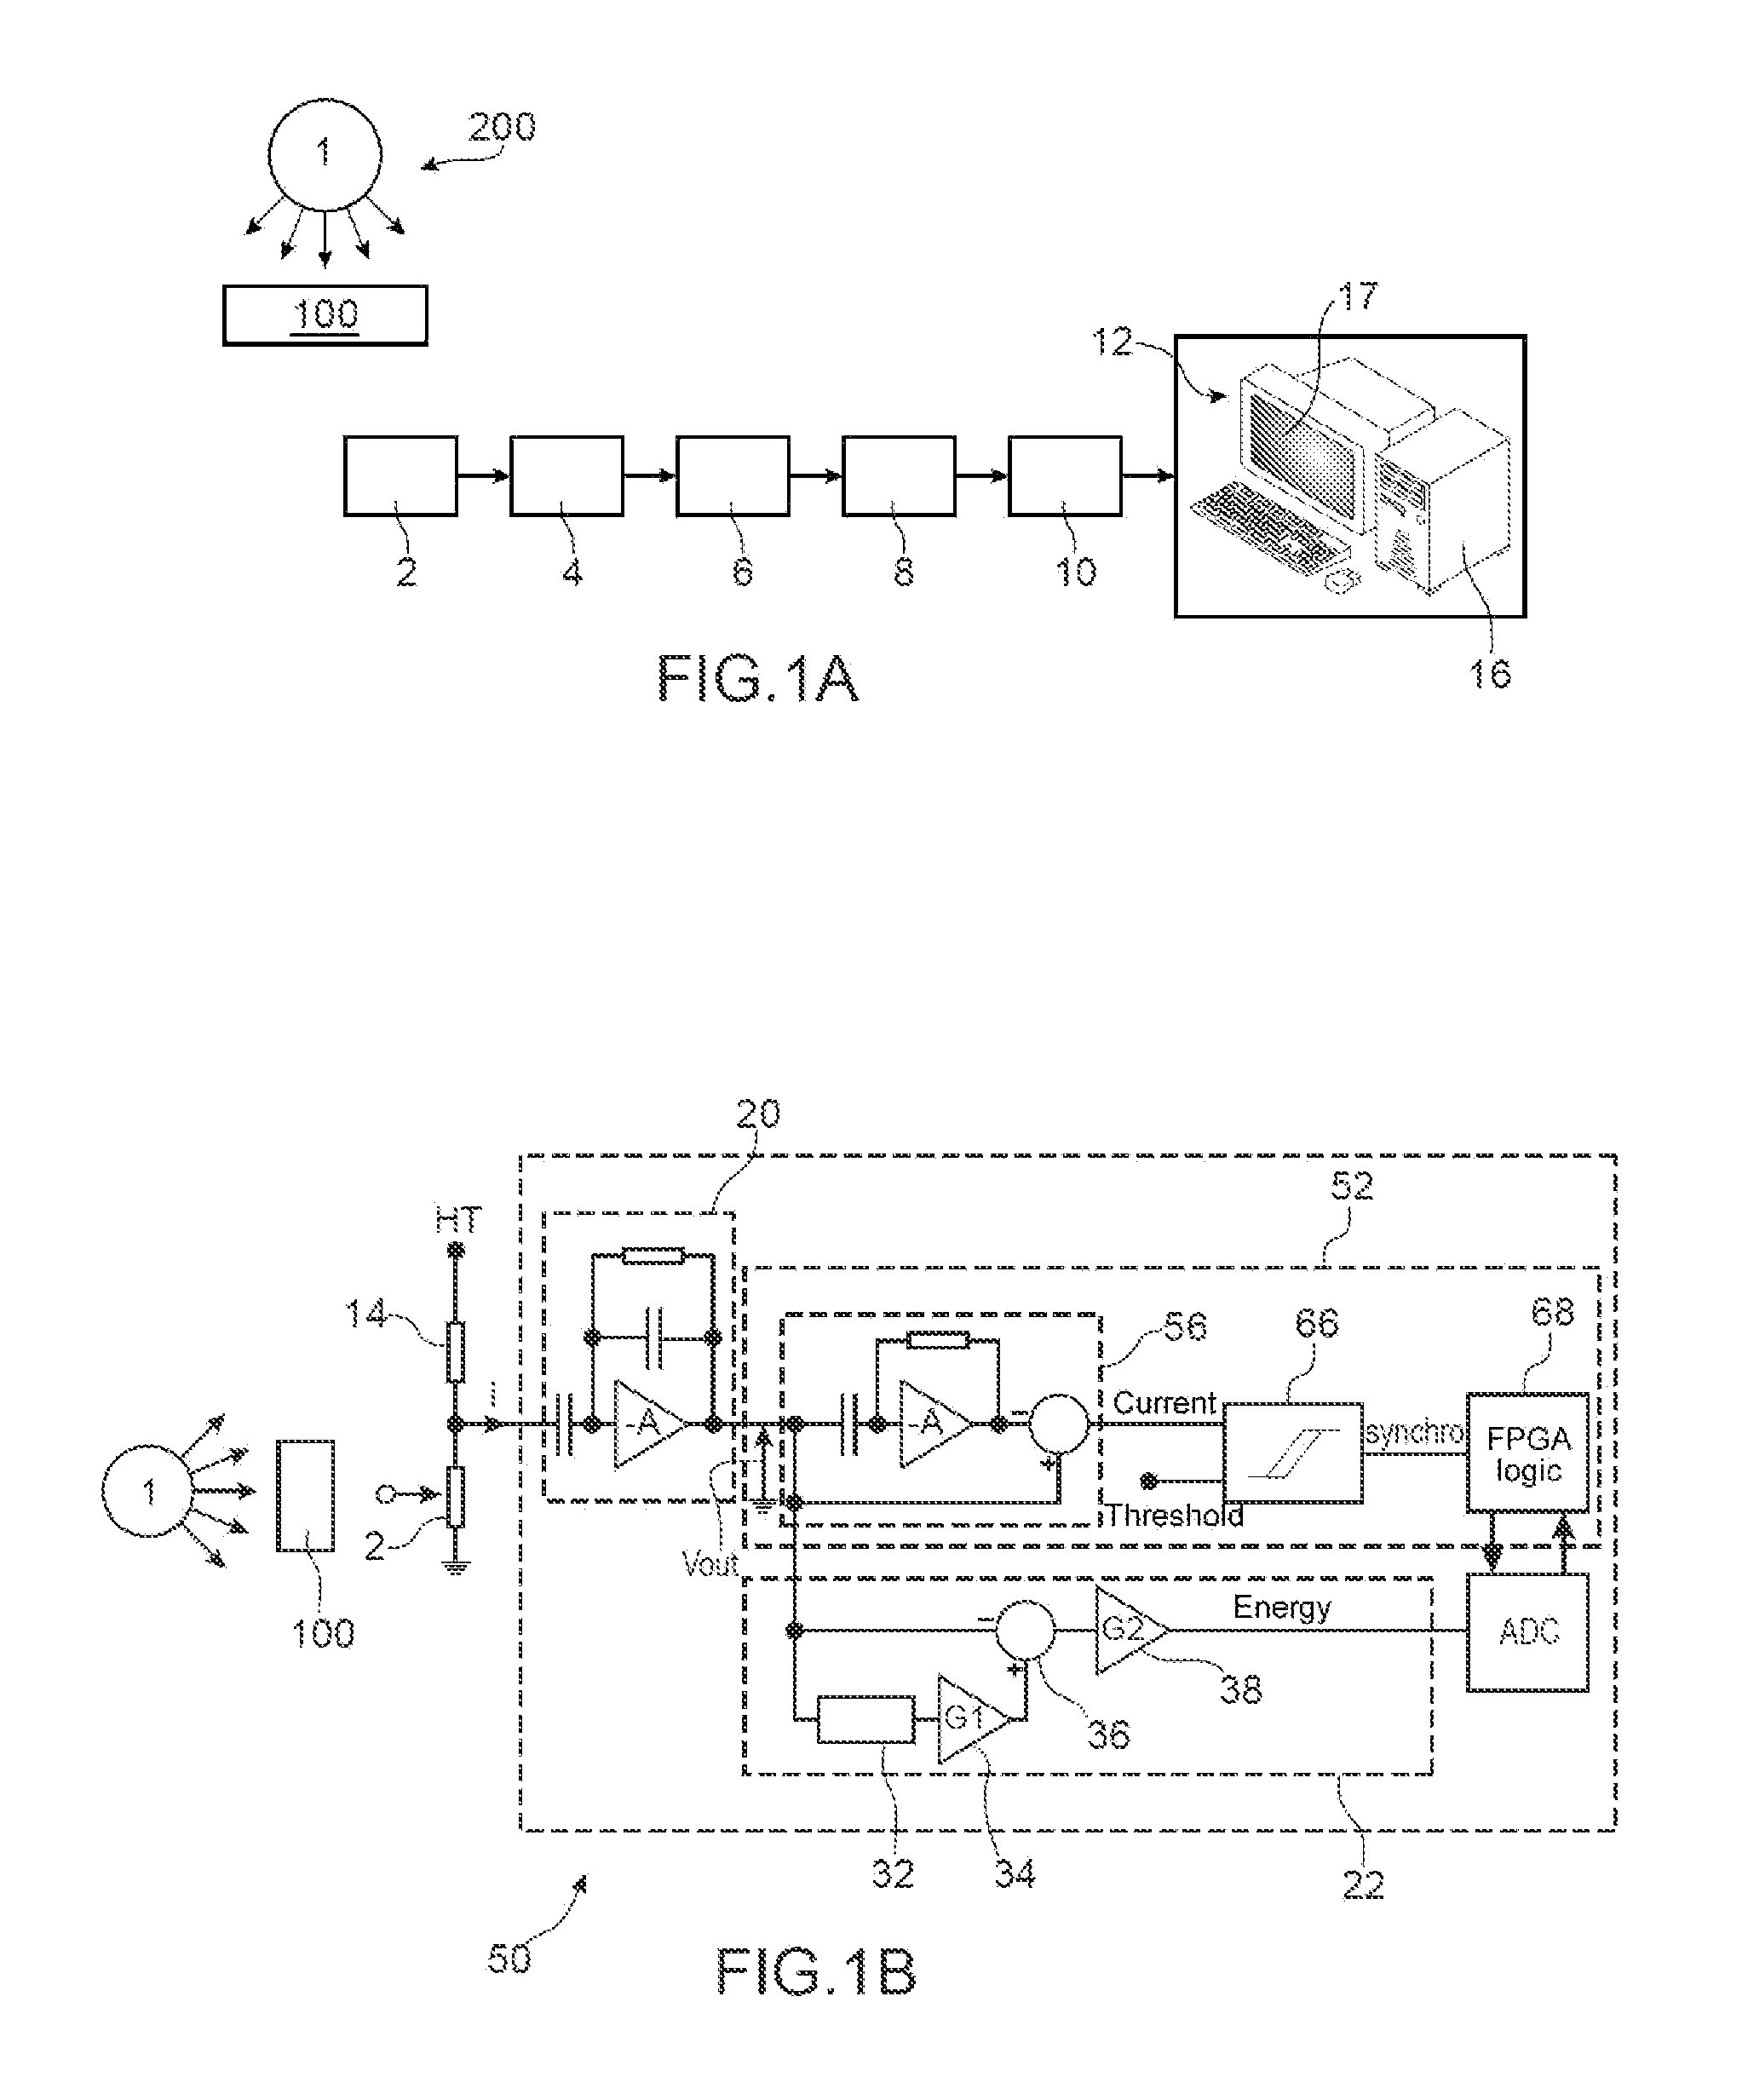 Method of identifying materials from multi-energy x-rays